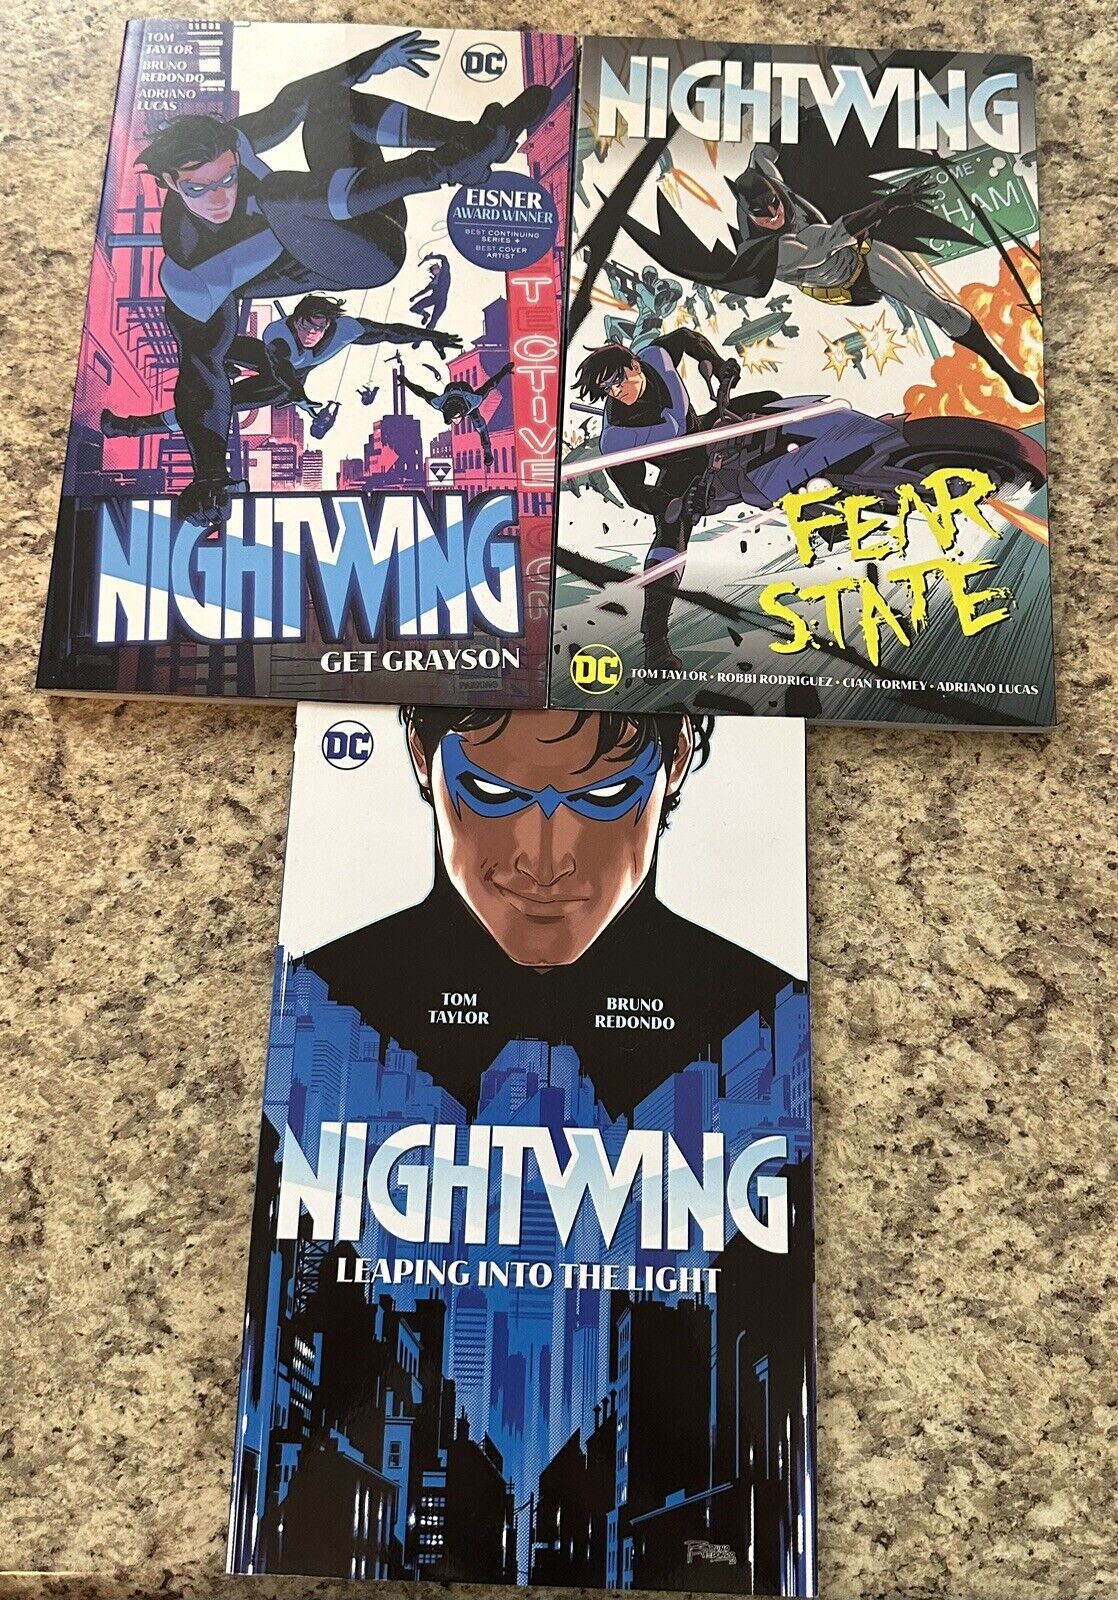 Nightwing Vol. 1, 2 & Fear State by Taylor, Tom [Paperback]